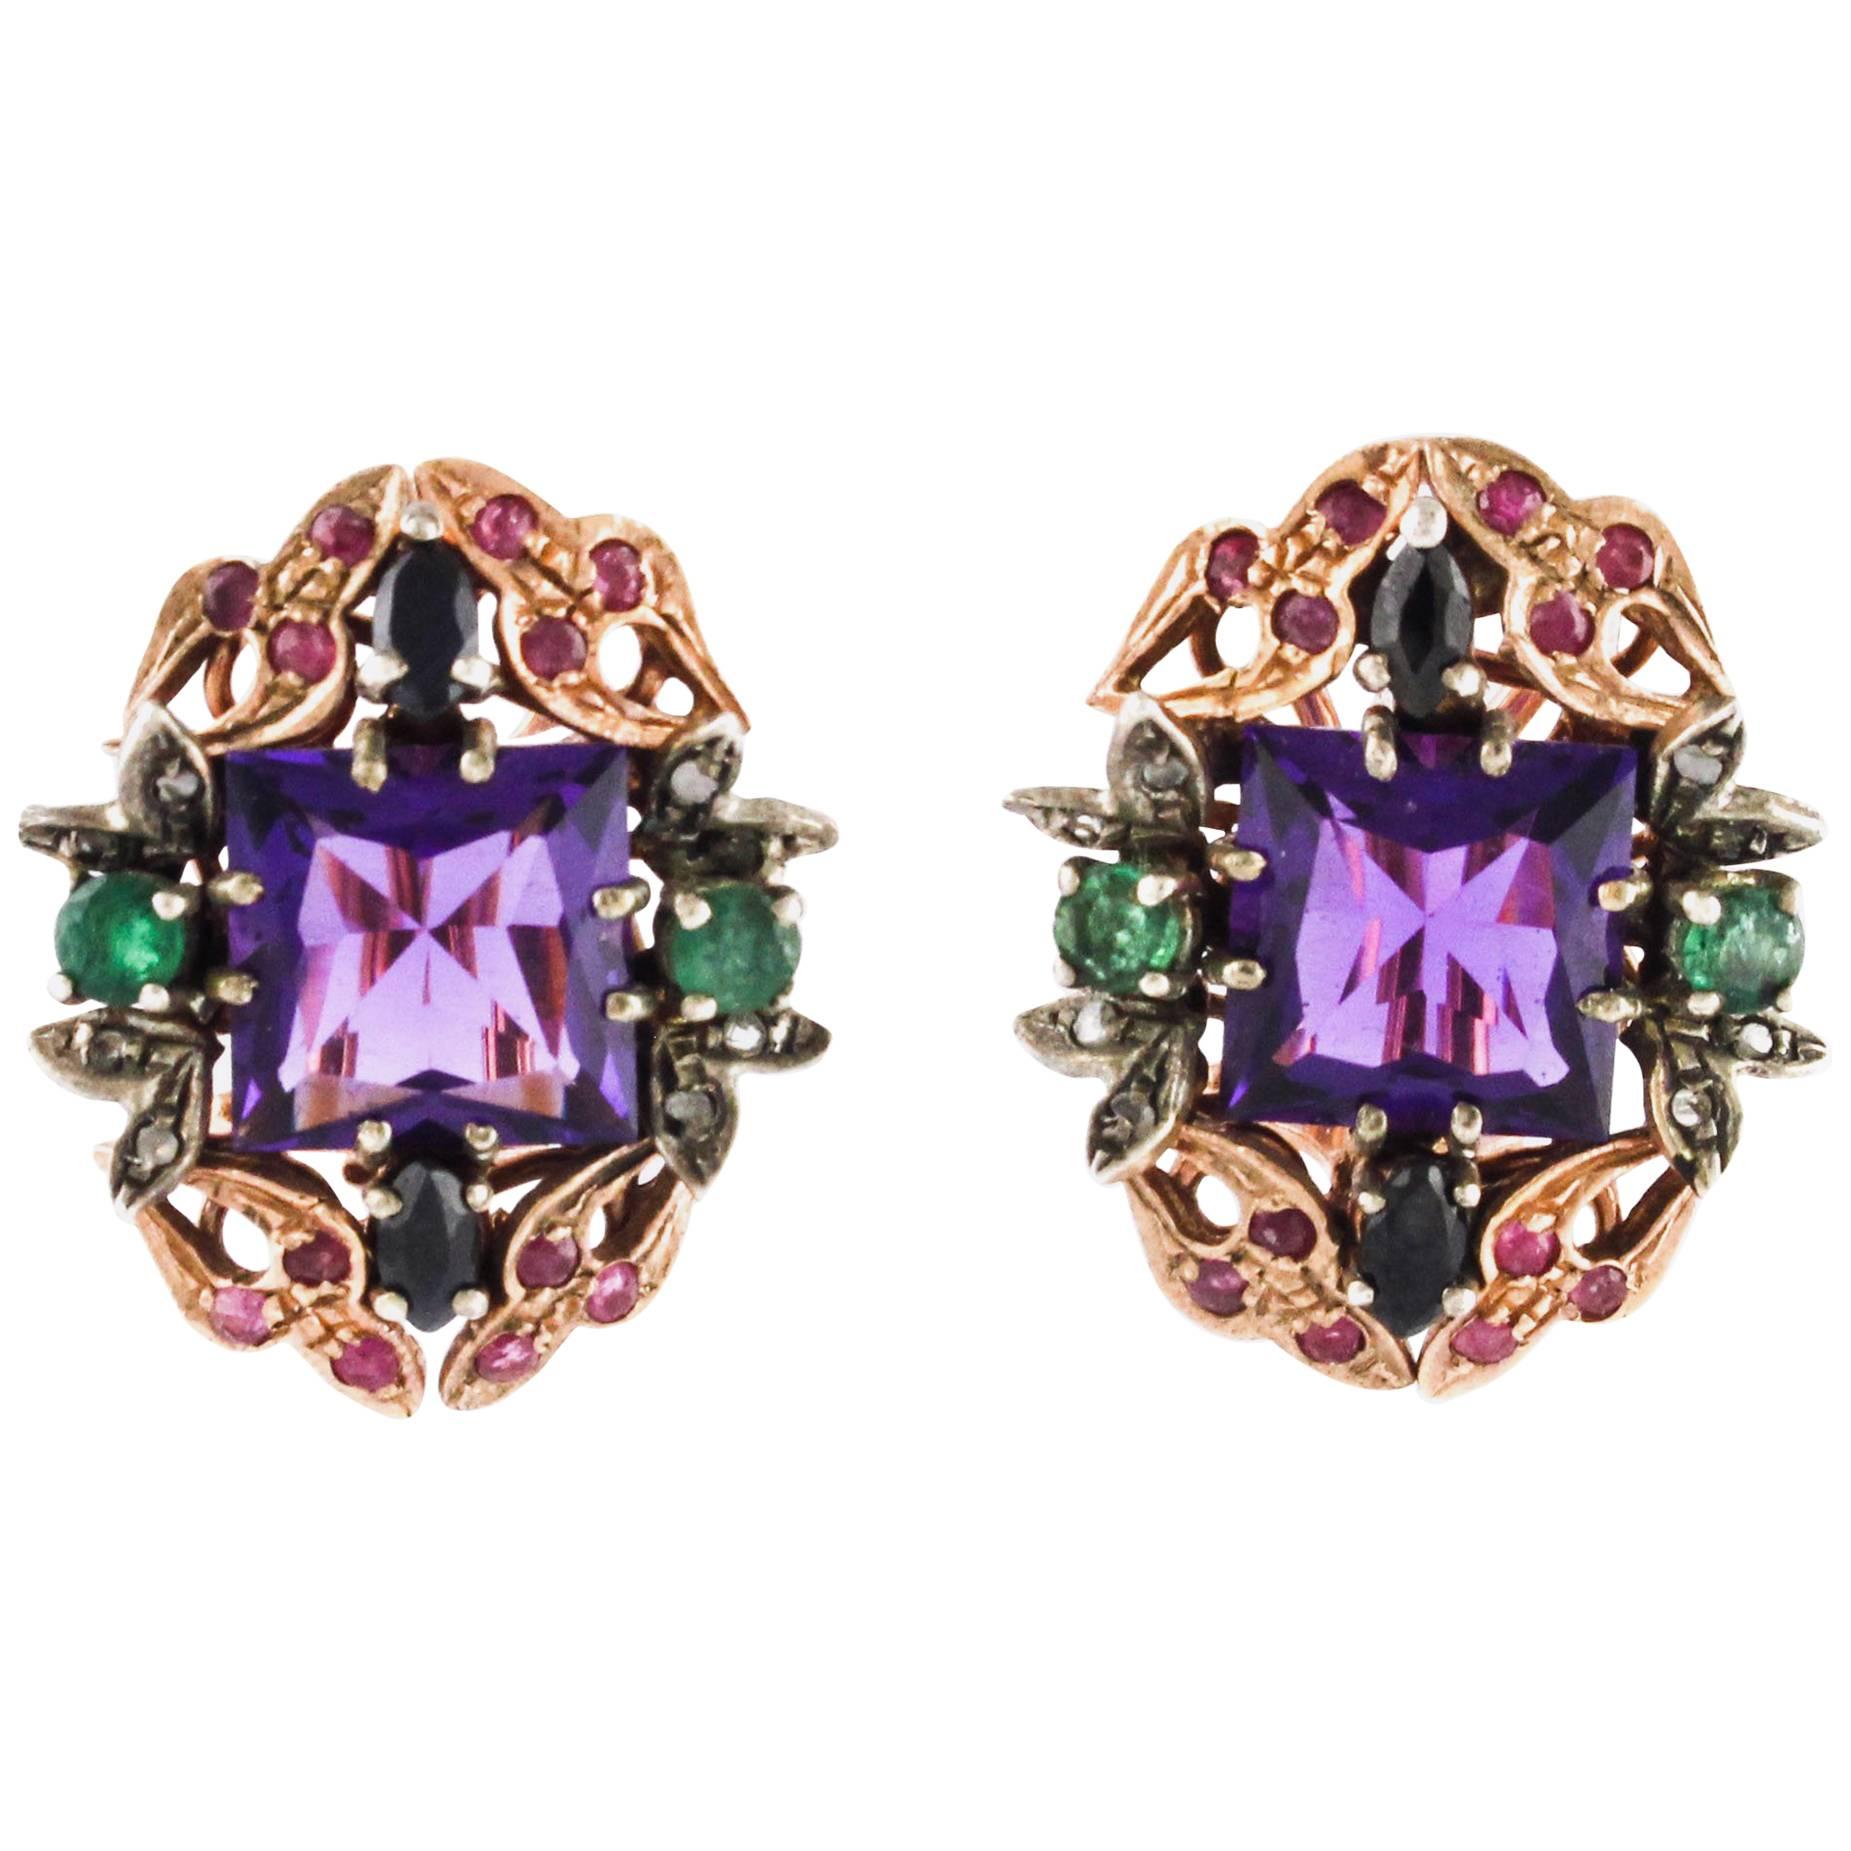  Amethyst Sapphires Ruby Emeralds Diamonds  Rose Gold and silver Earring